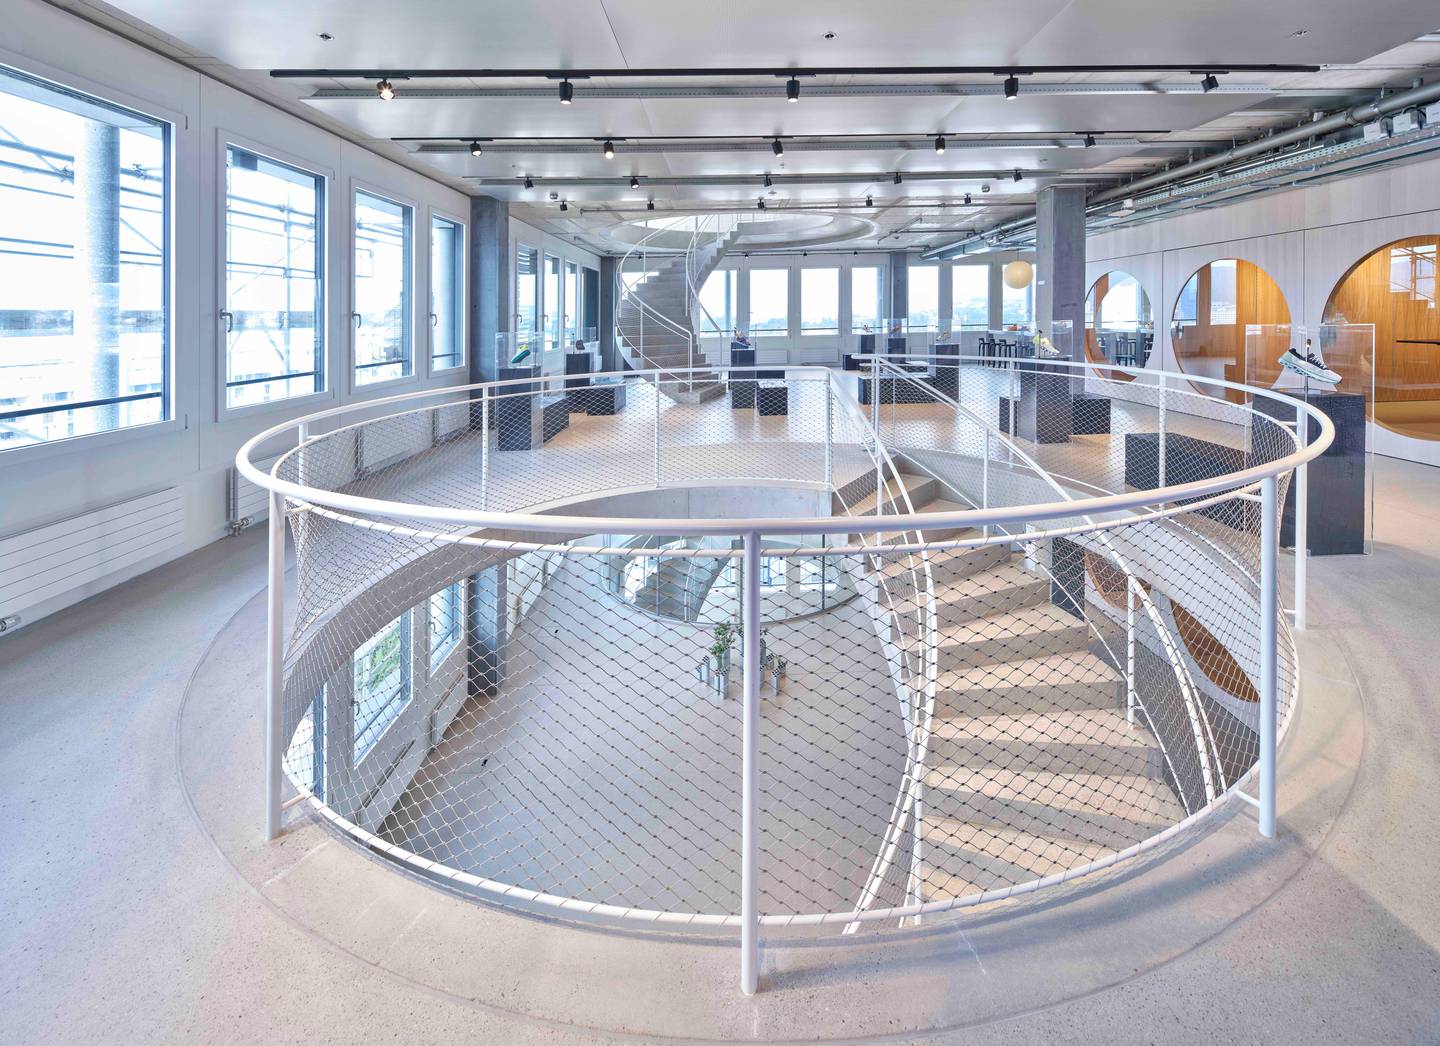 On, the Zurich, Switzerland-based running shoe brand, opened this year its new 17-story office space outfitted with a central staircase dubbed 